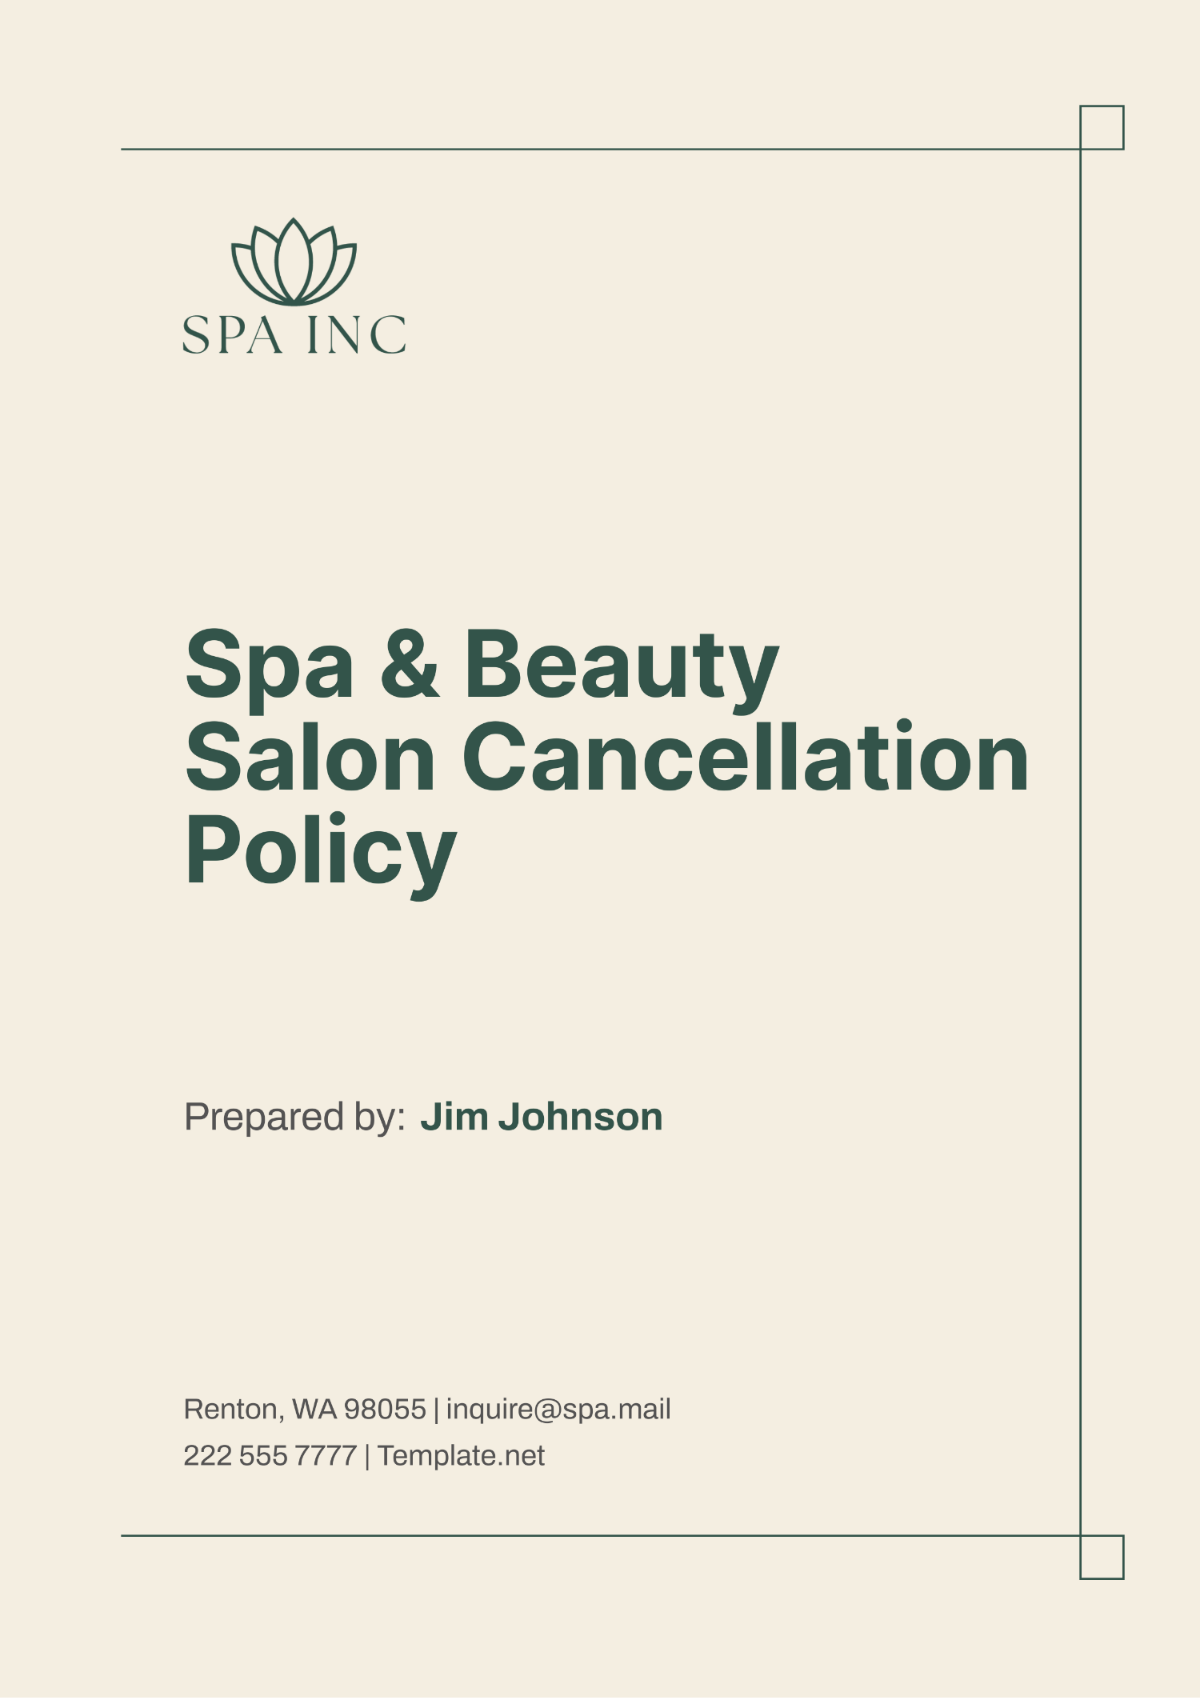 Free Spa & Beauty Salon Cancellation Policy Template